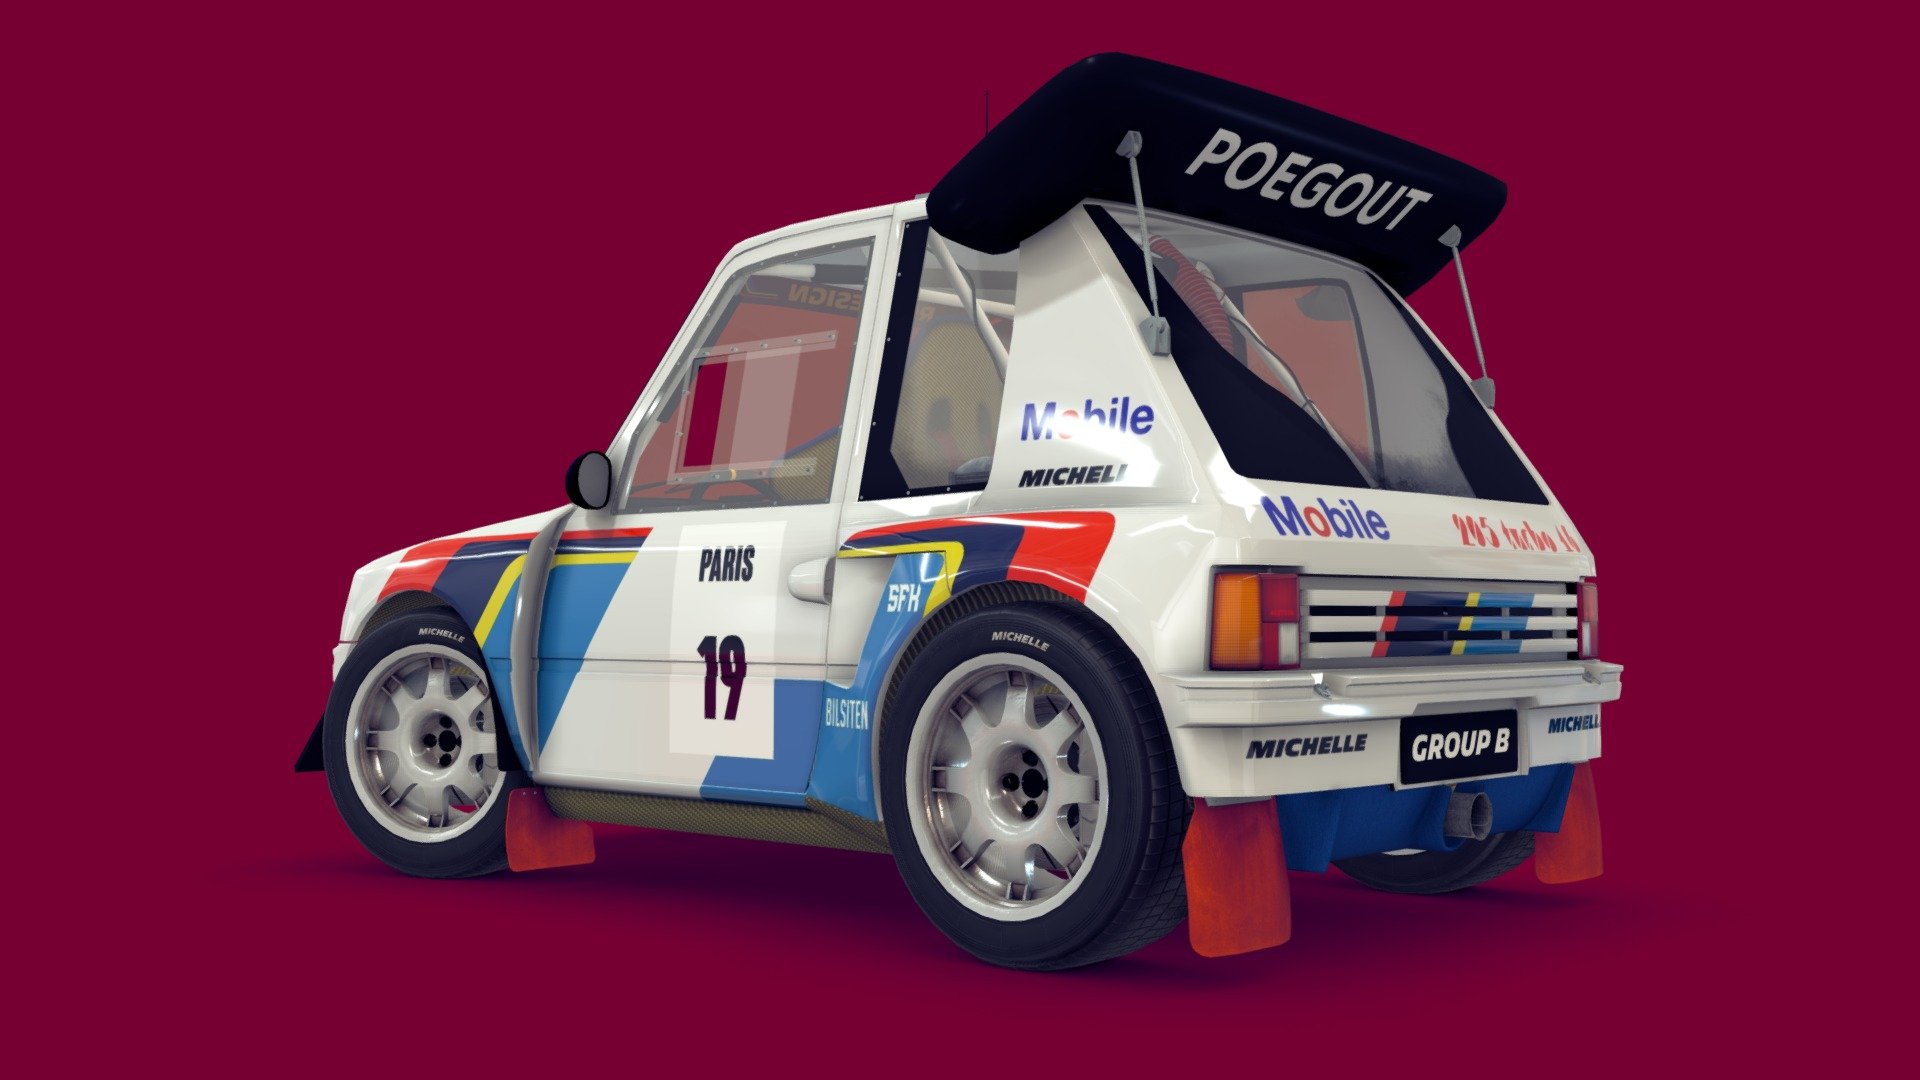 Cartoon style model of Group B rally car from 1980s. Made by French car manufacturer to compete in one of most dangerous autosport categories. Group B was introduced in 1982 and eventually banned in the end of 1986 due to fatalities.
Check out my other cartoon car models at www.retrocartooncars.com 3d model